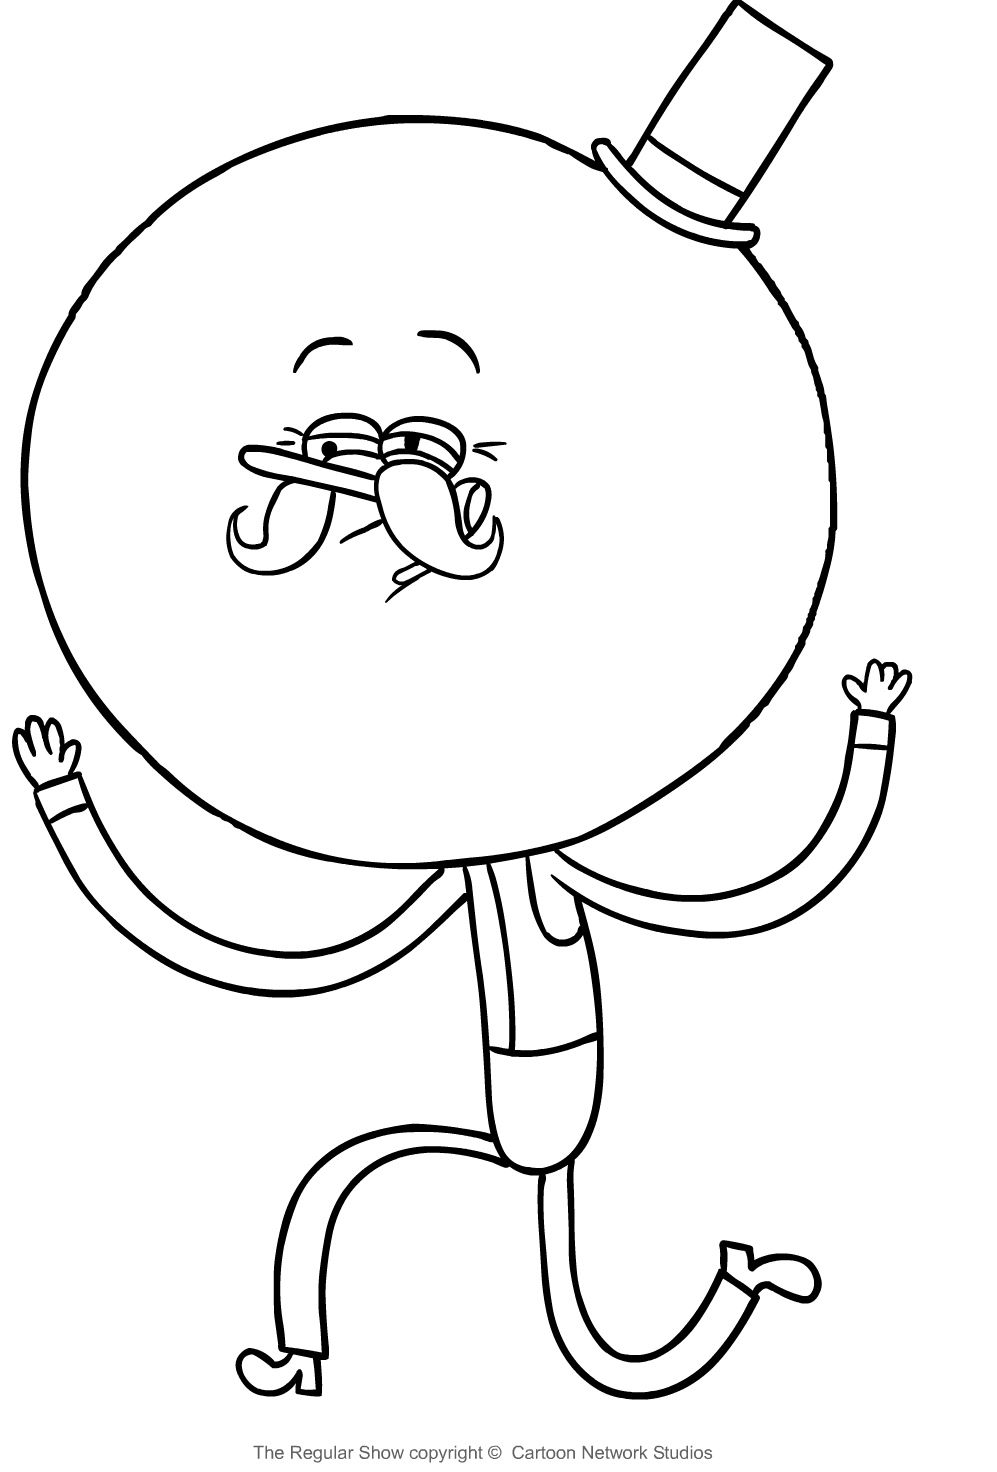 Pops Maellard from Regular Show coloring page to print and coloring